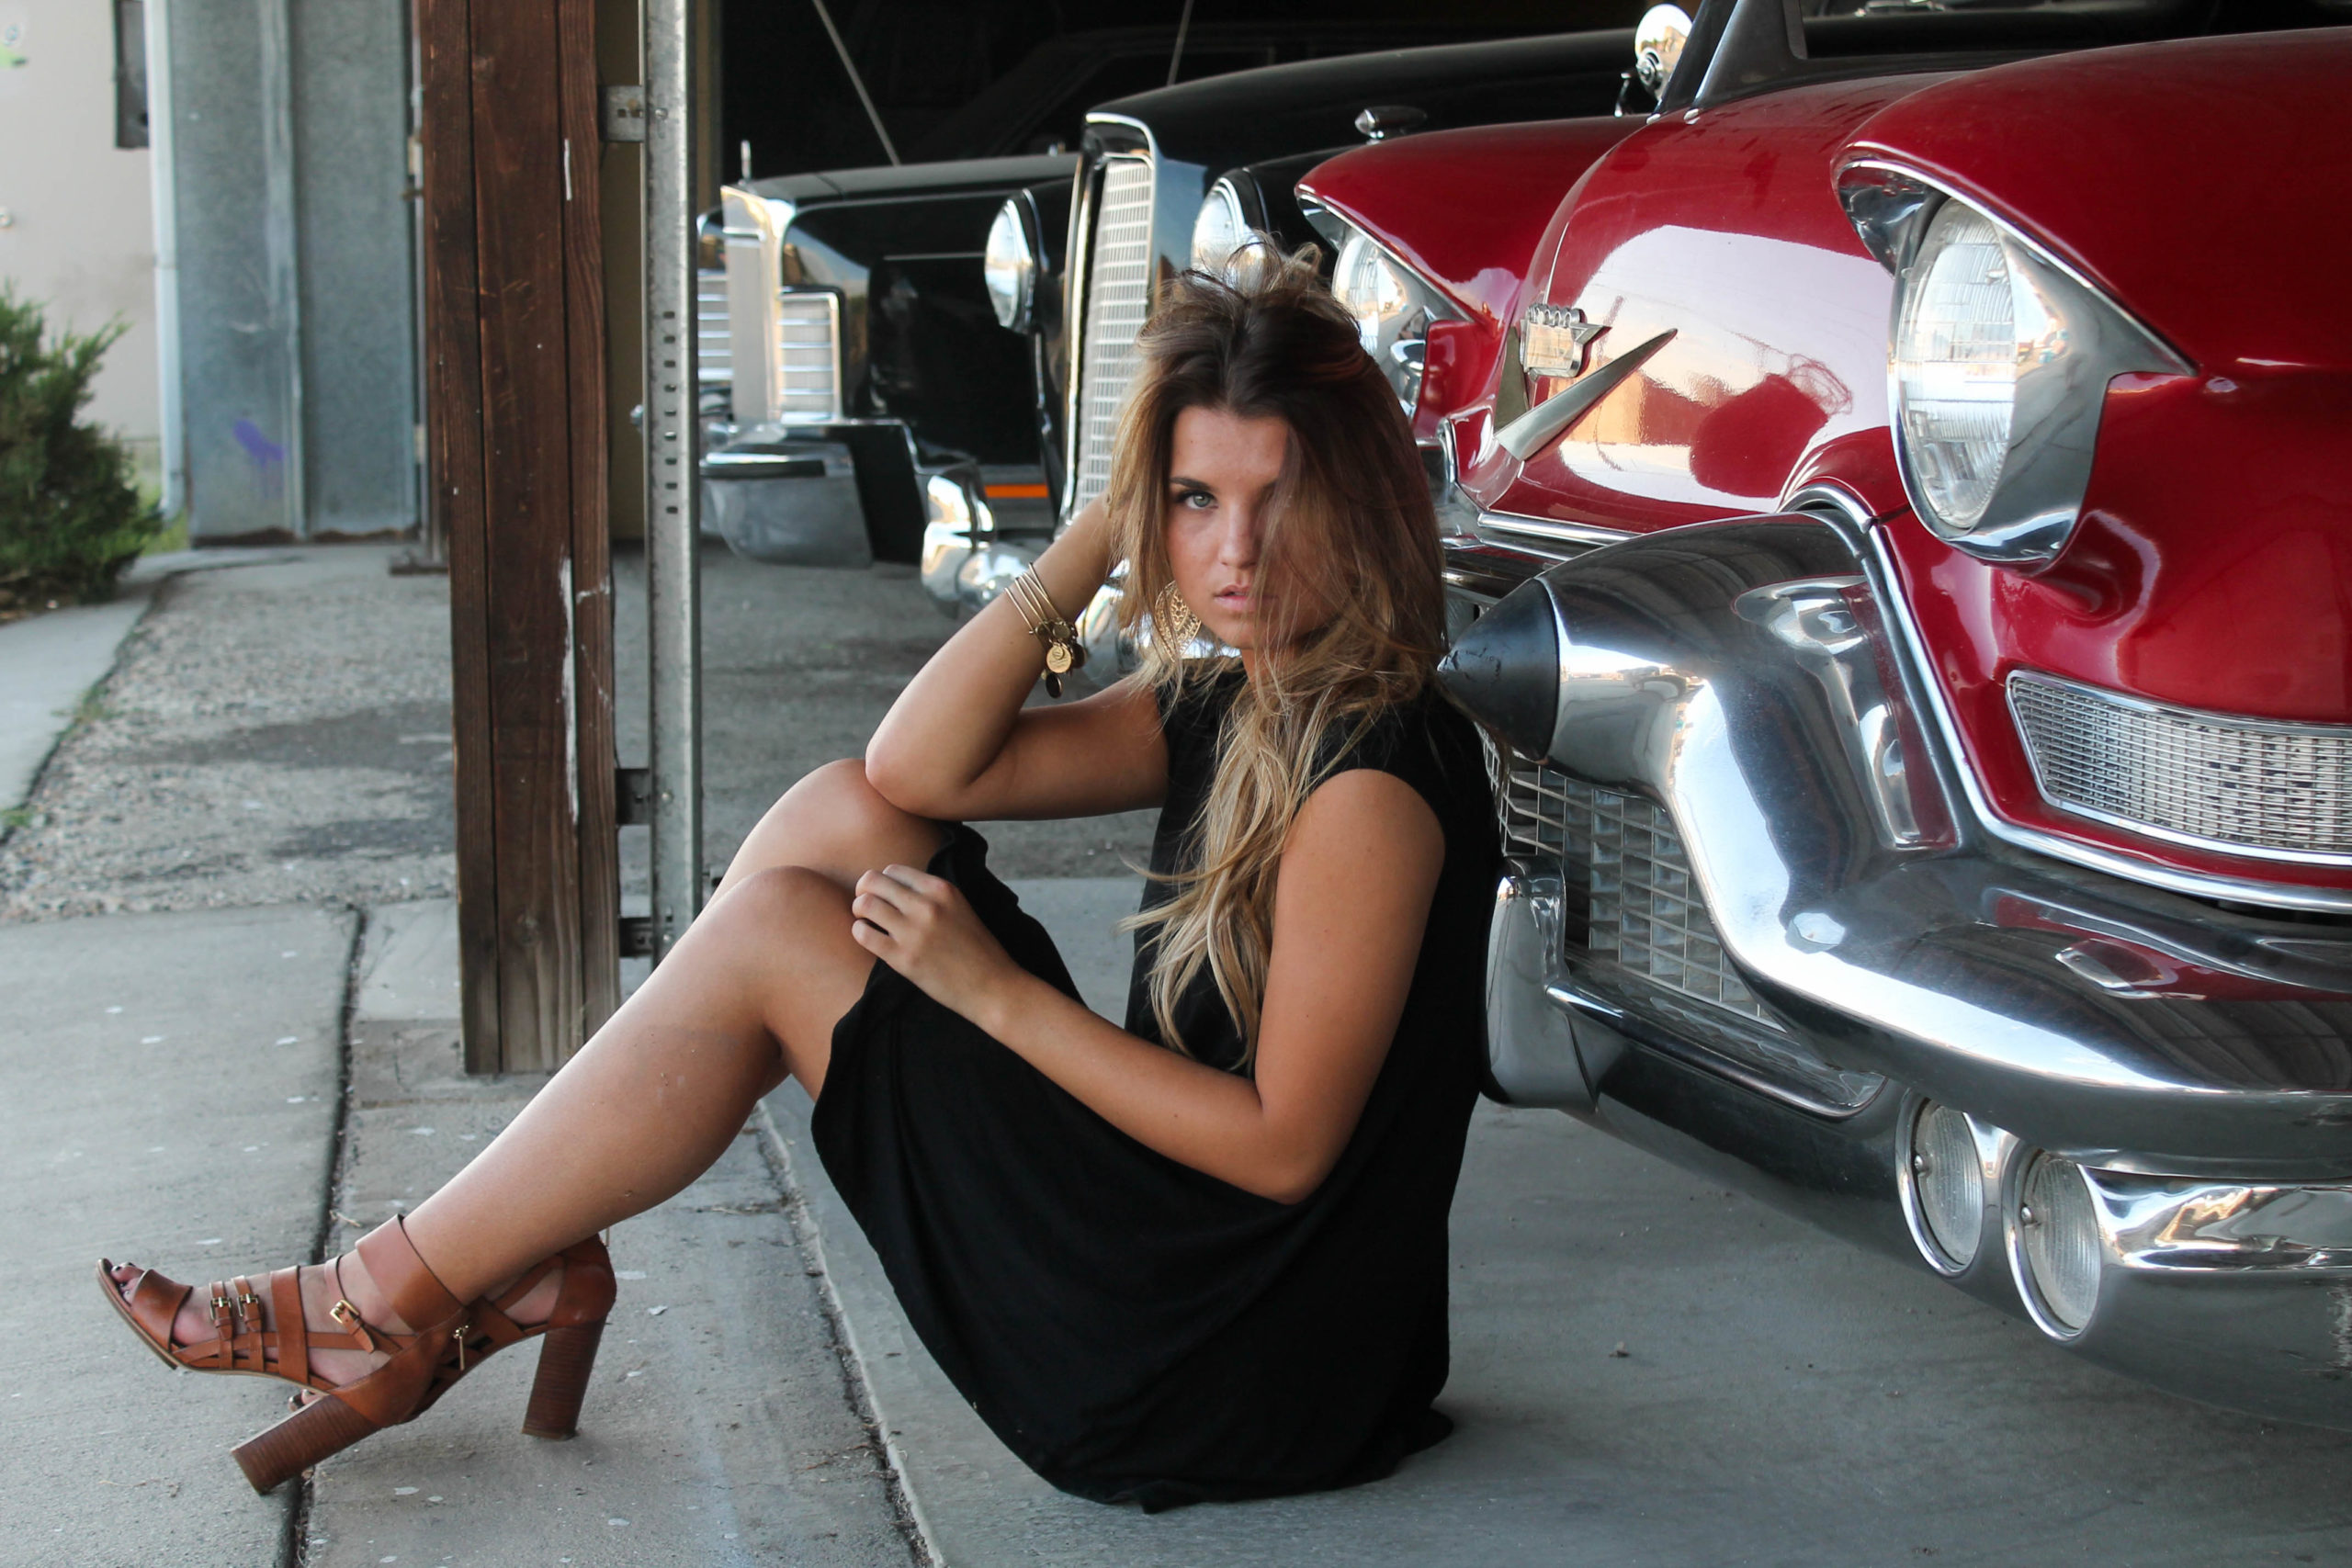 Kendeyl & Classic Car Photoshoot | Captured By Lexi In Utah